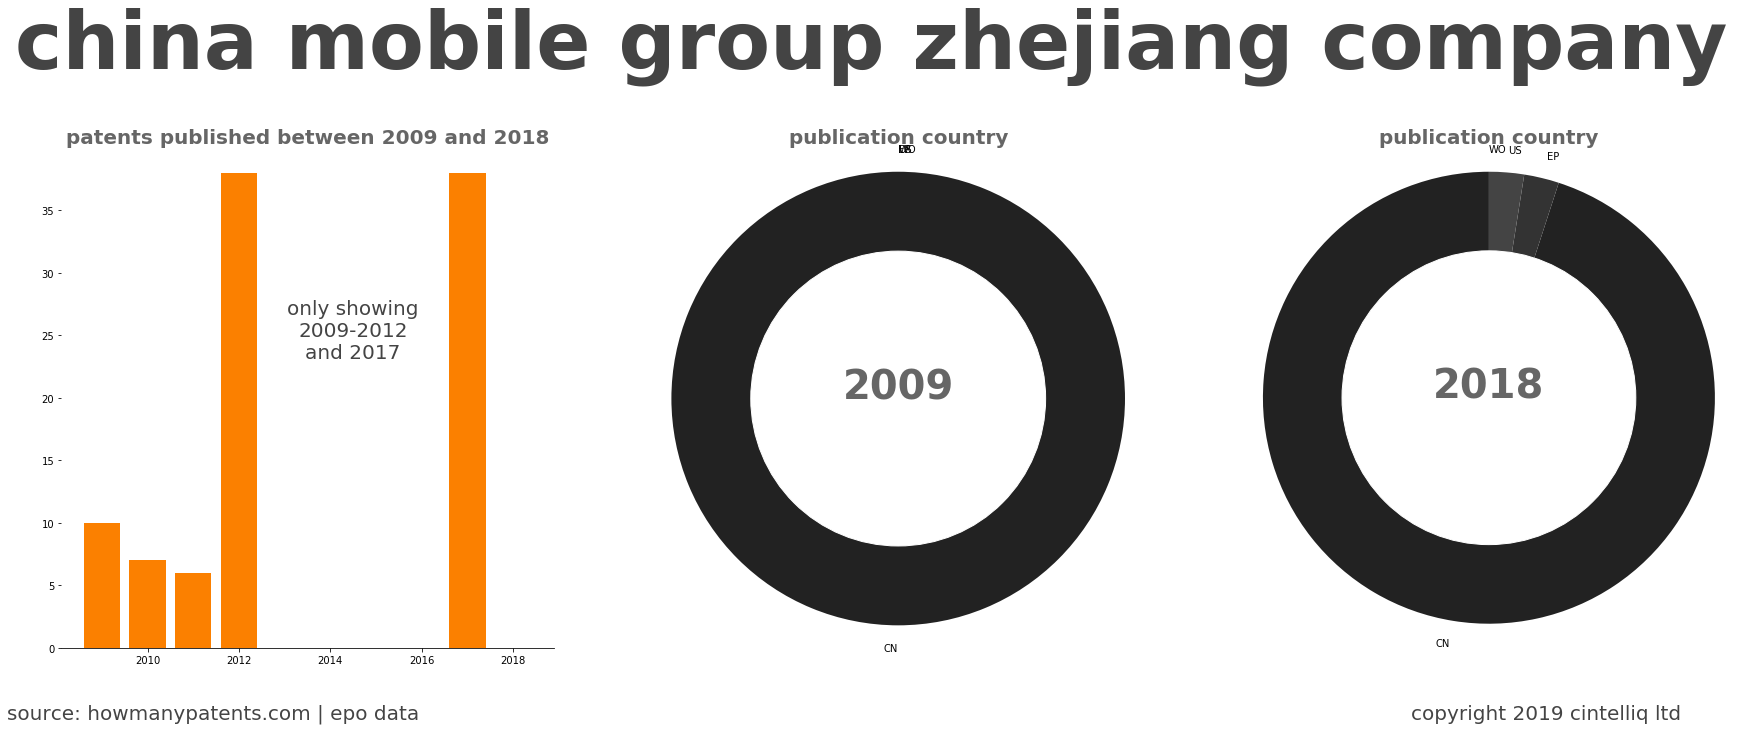 summary of patents for China Mobile Group Zhejiang Company